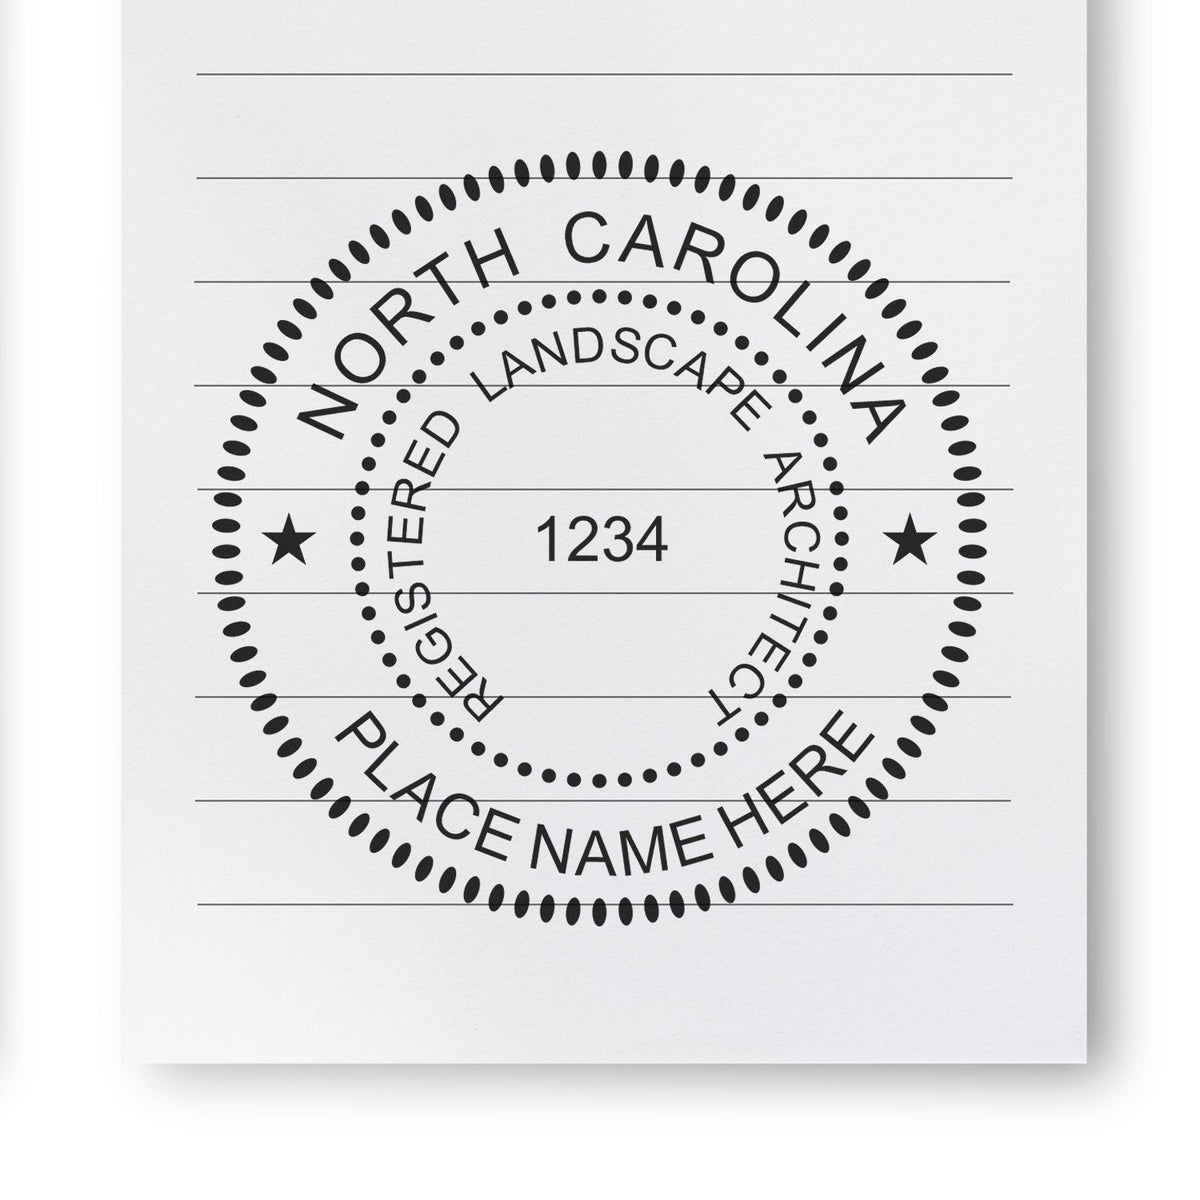 This paper is stamped with a sample imprint of the Premium MaxLight Pre-Inked North Carolina Landscape Architectural Stamp, signifying its quality and reliability.